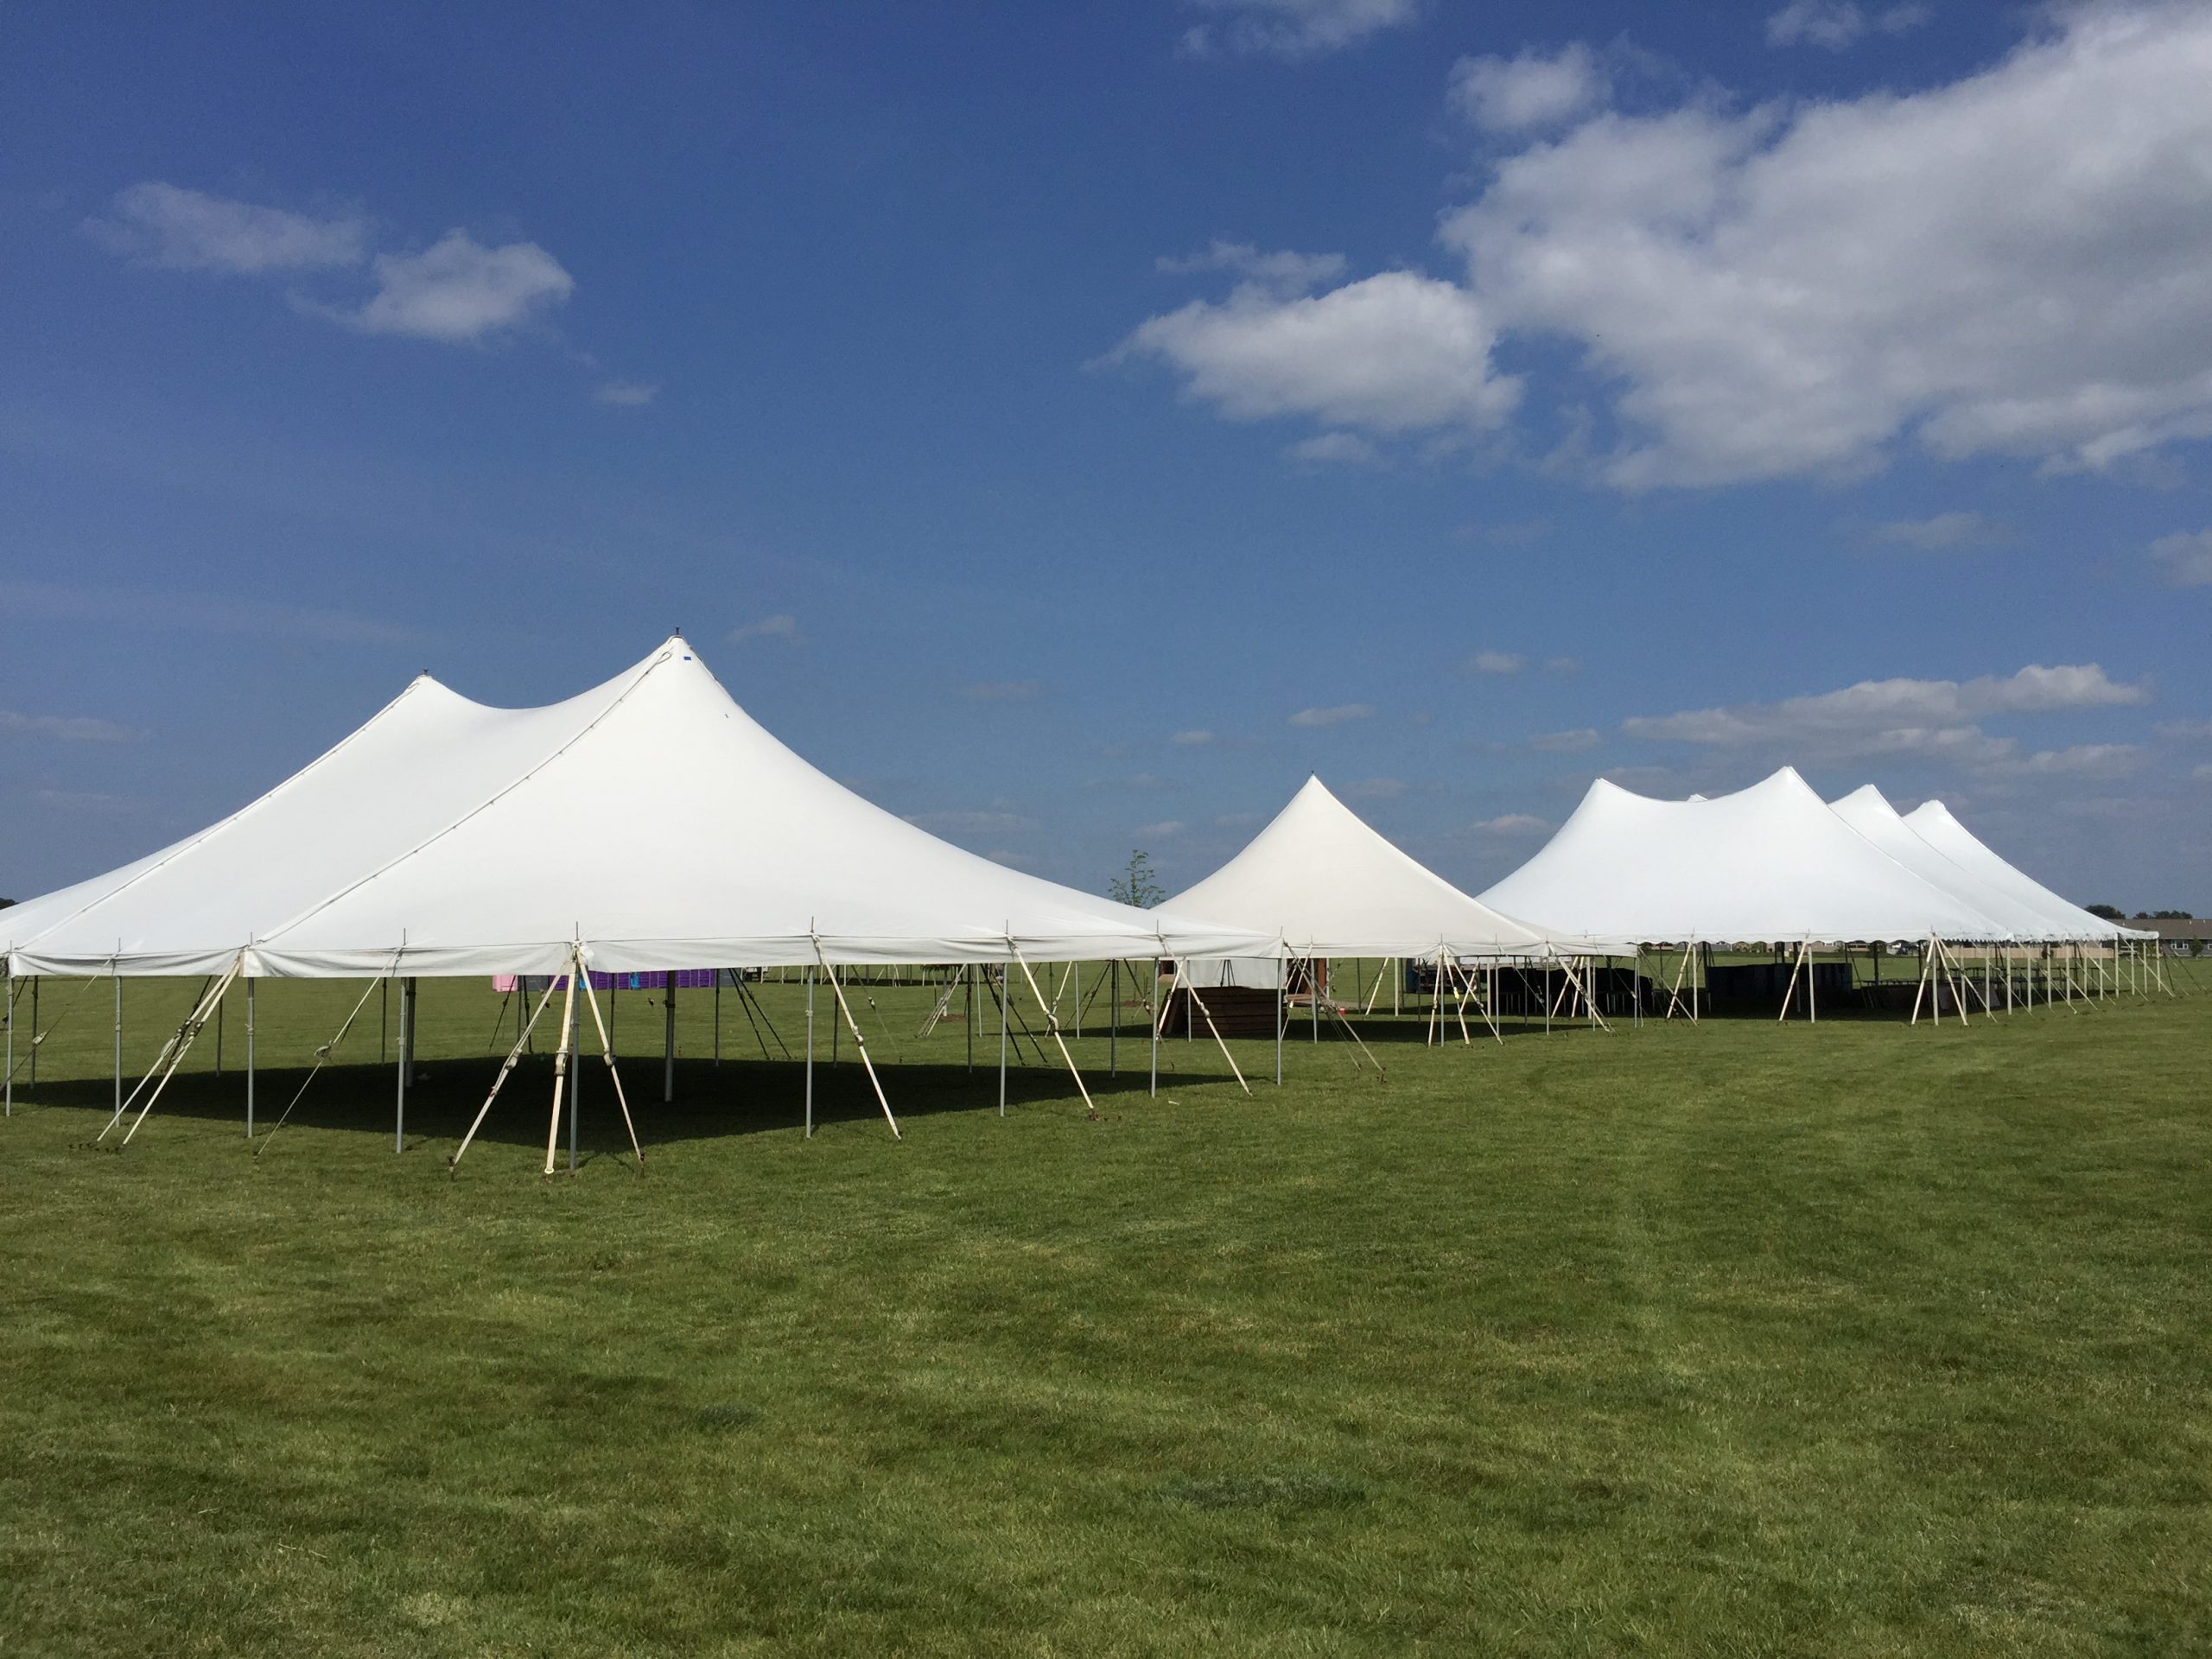 Rope and Pole tents set-up for outdoor festival